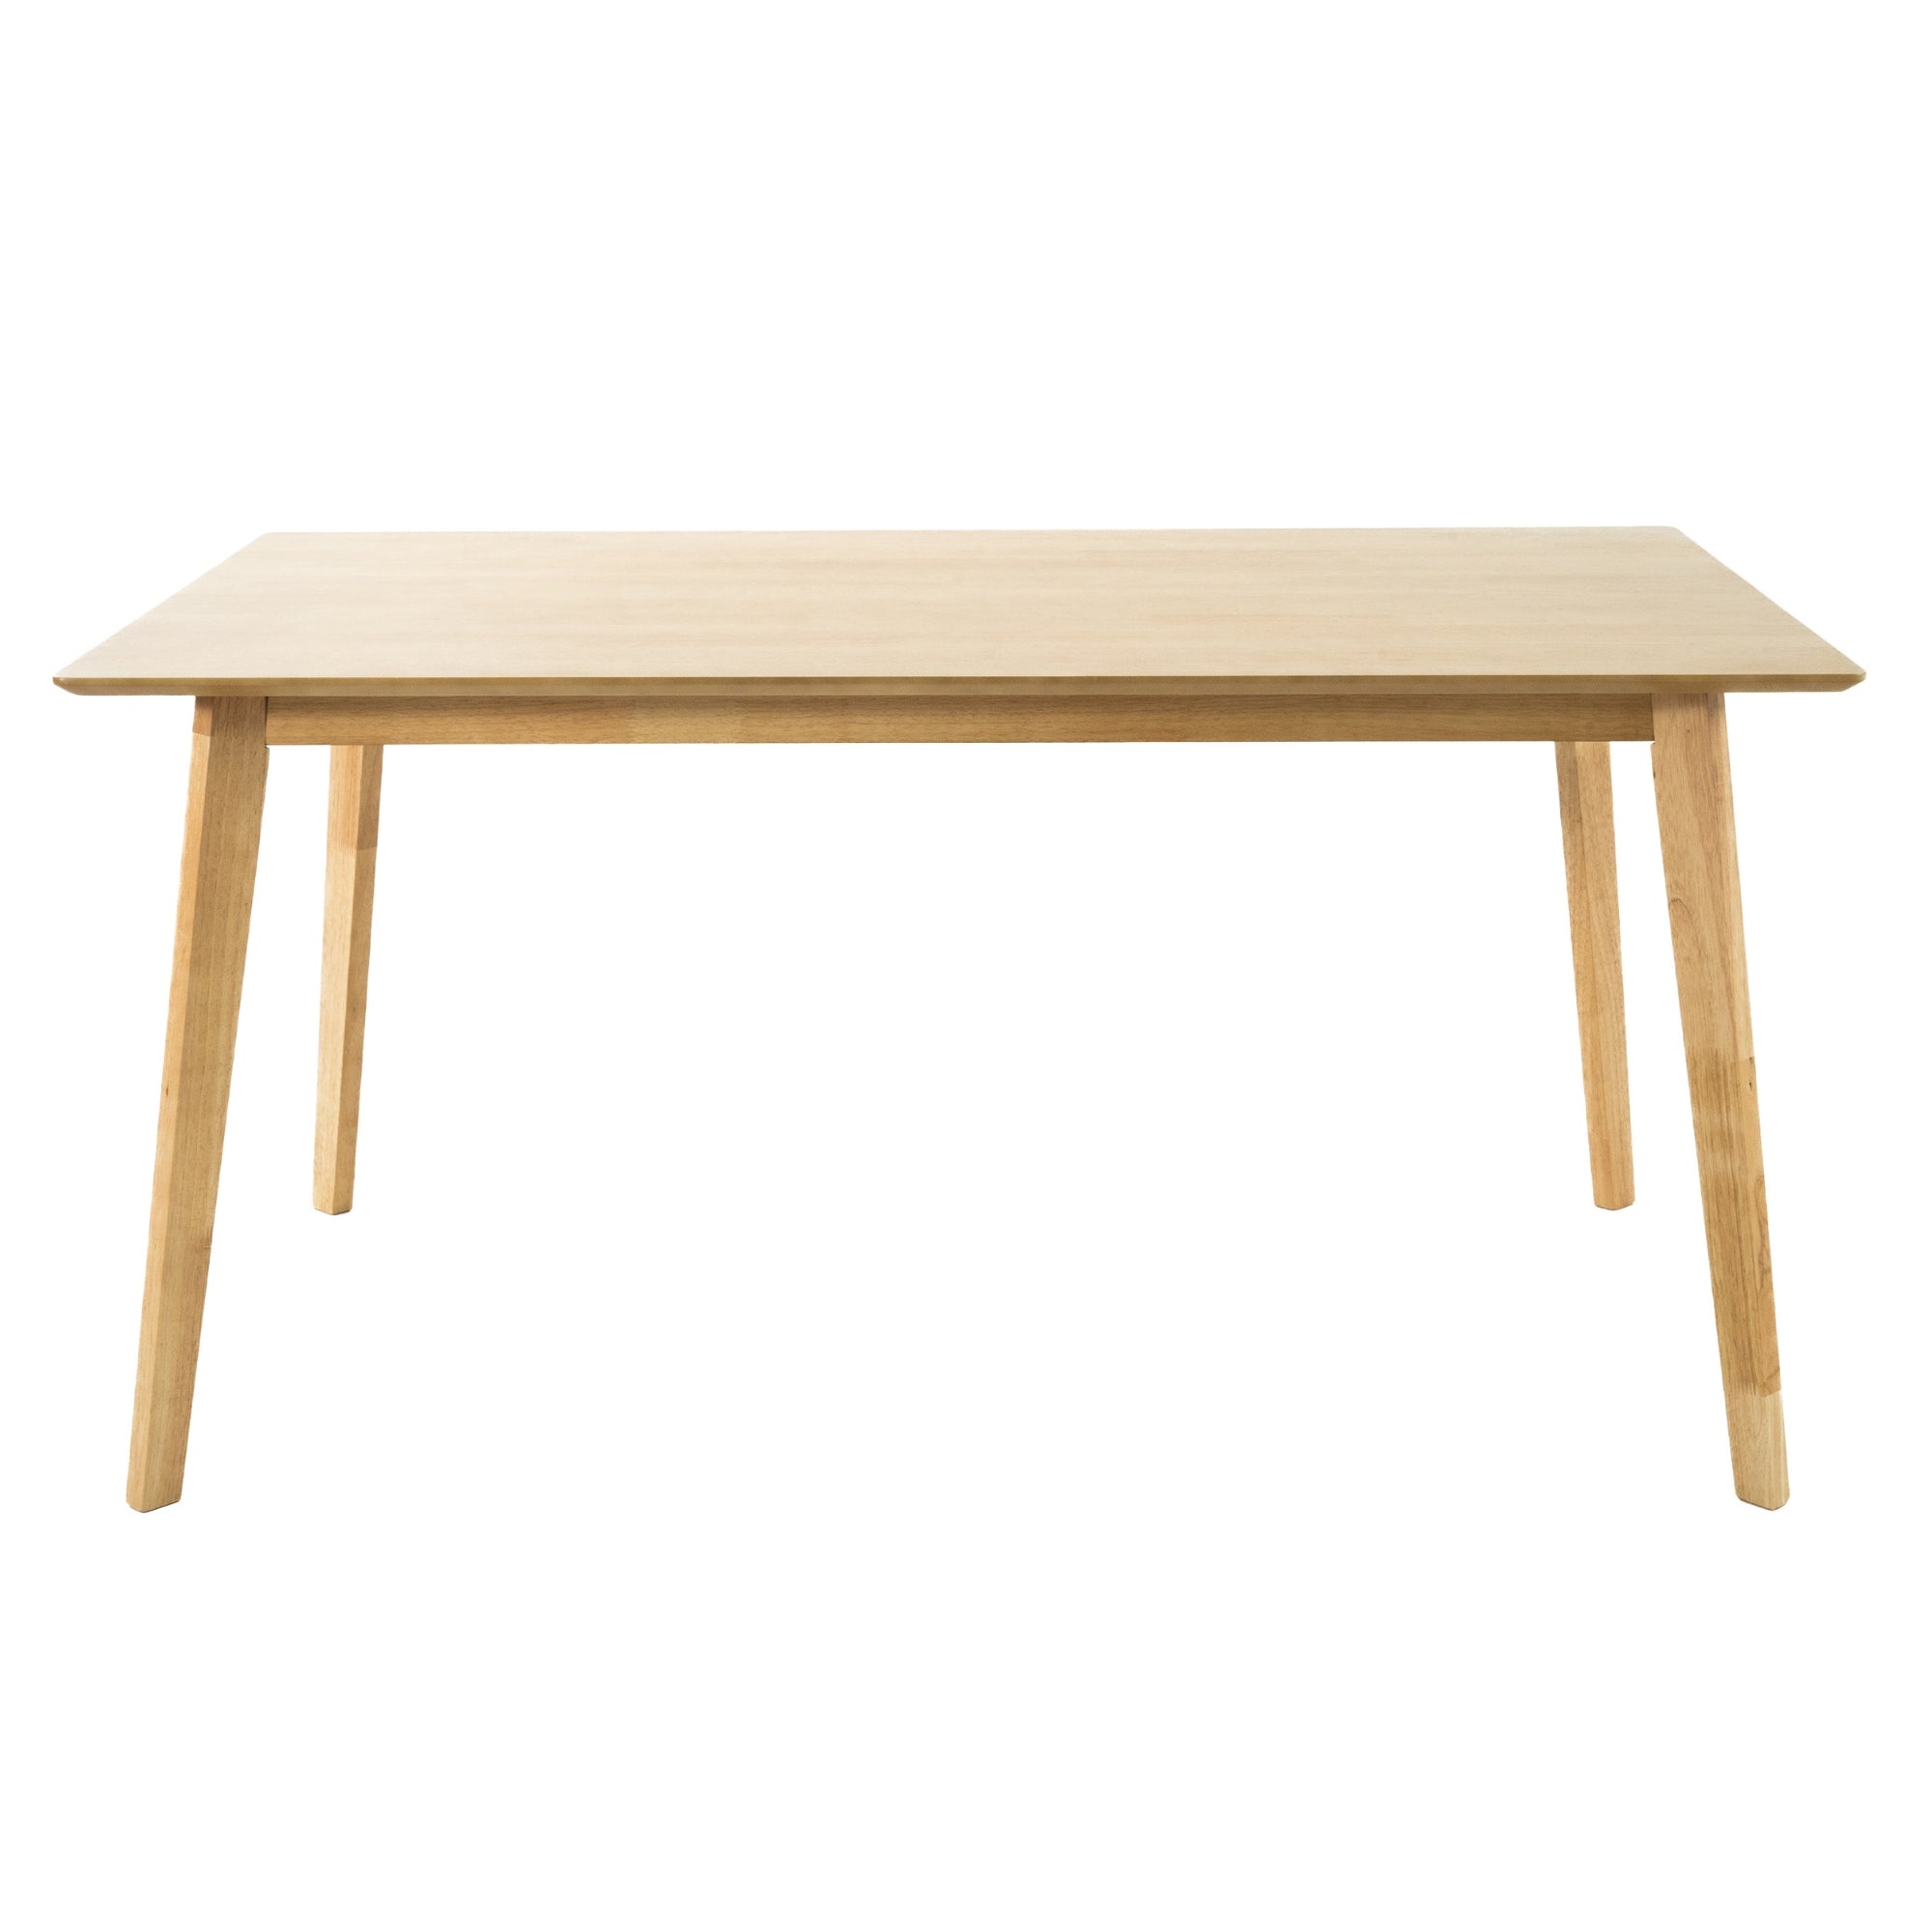 6-Seater Solid Rubberwood Dining Table, Scandinavian Style